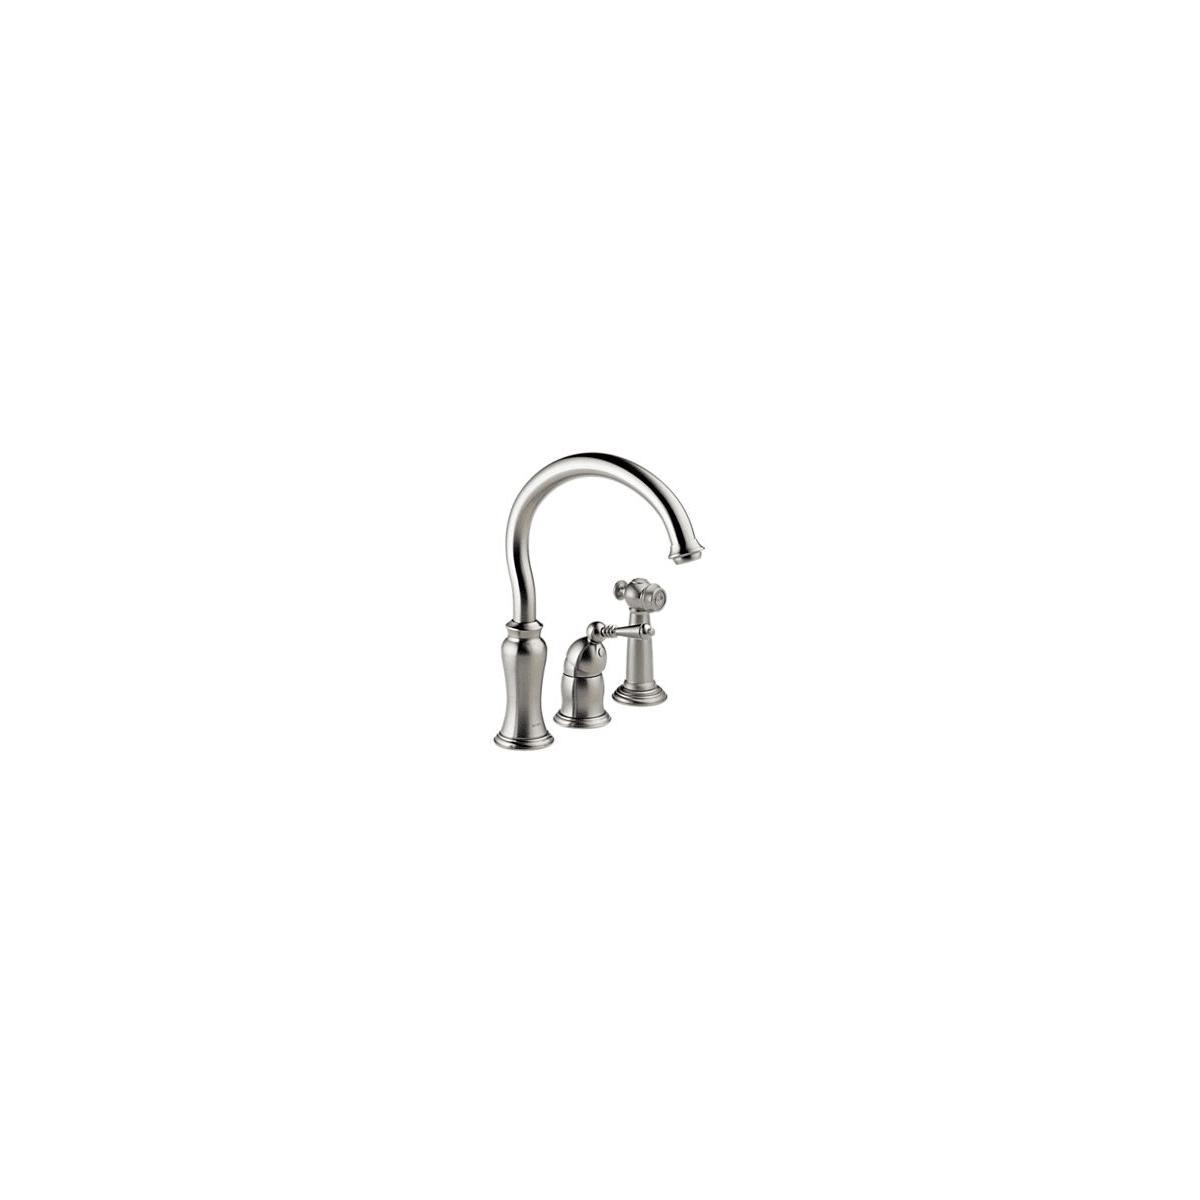 Brizo 61301 Ss136 Stainless Steel Single Handle Kitchen Faucet